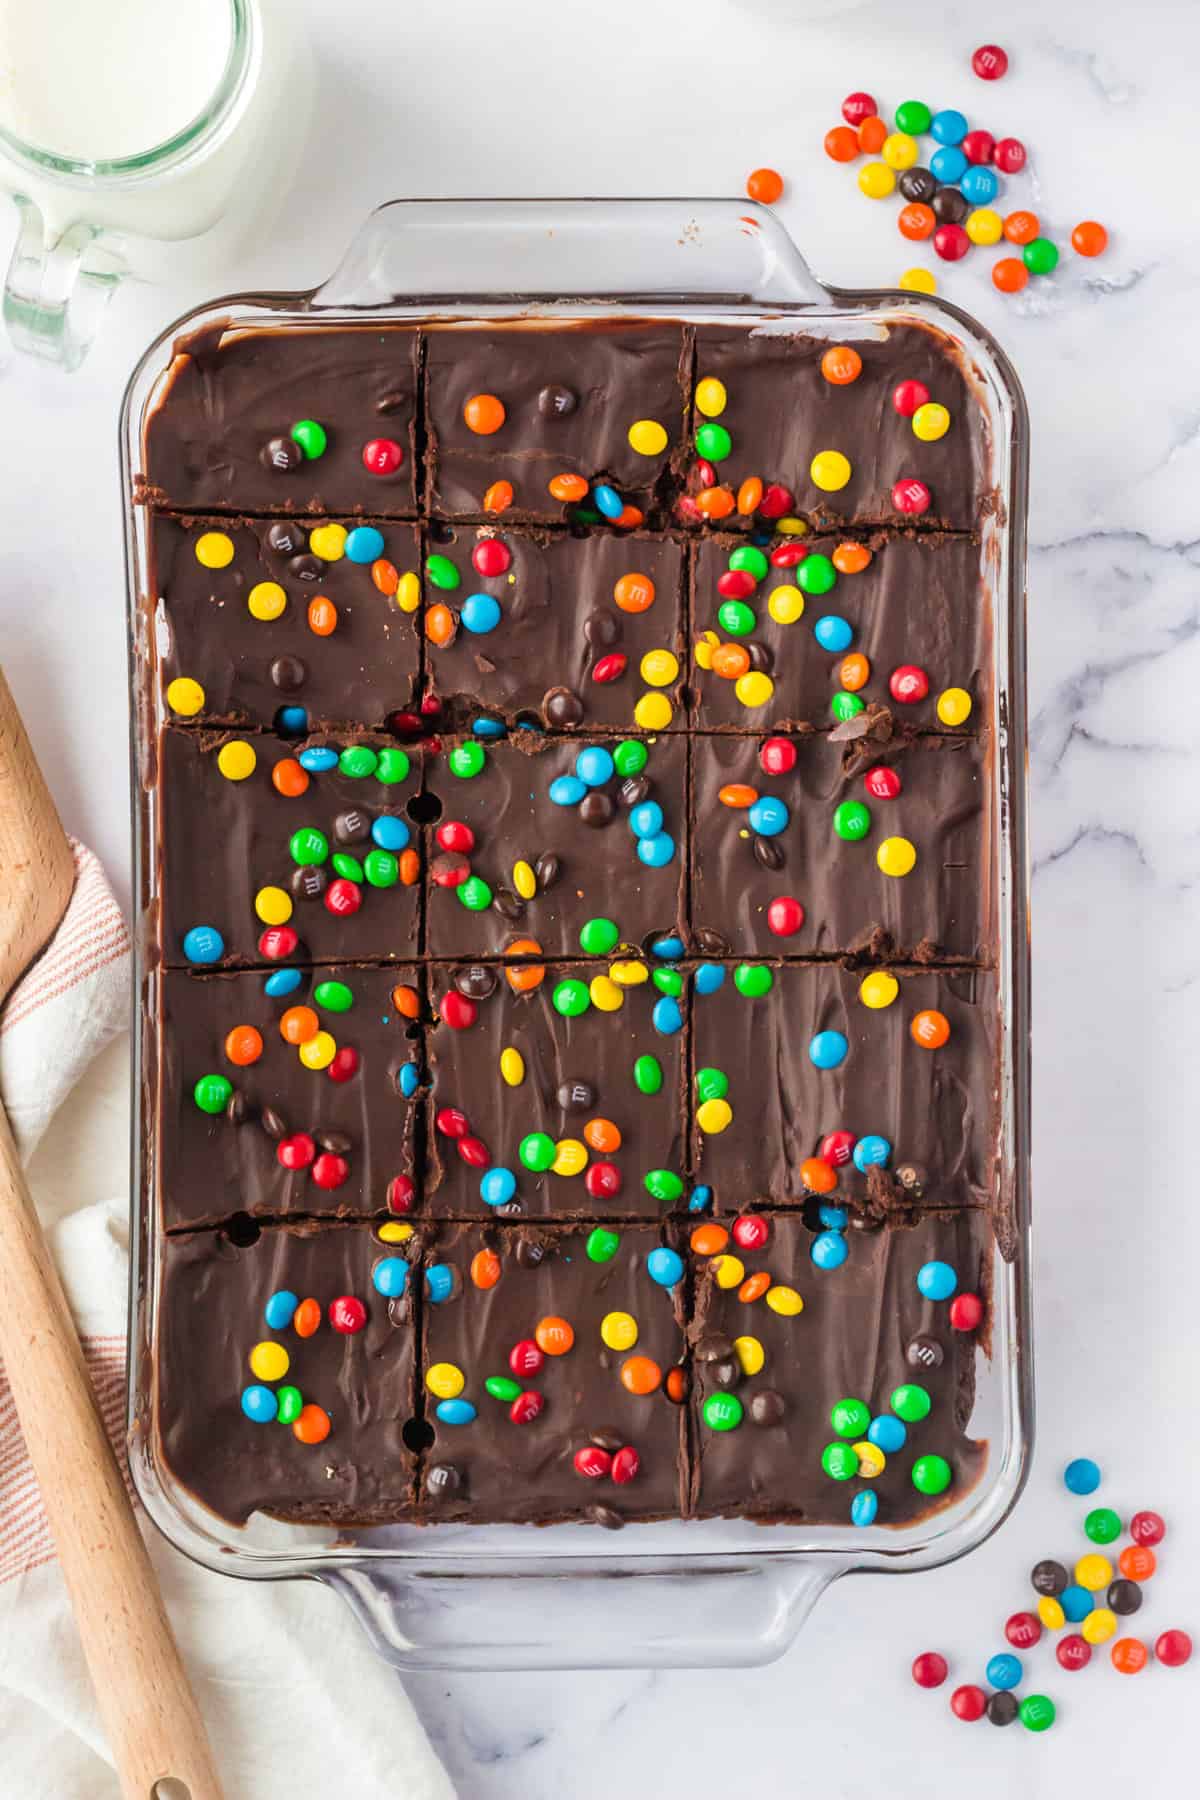 A baking dish is filled with frosted cosmic brownies, topped with M&M candies.